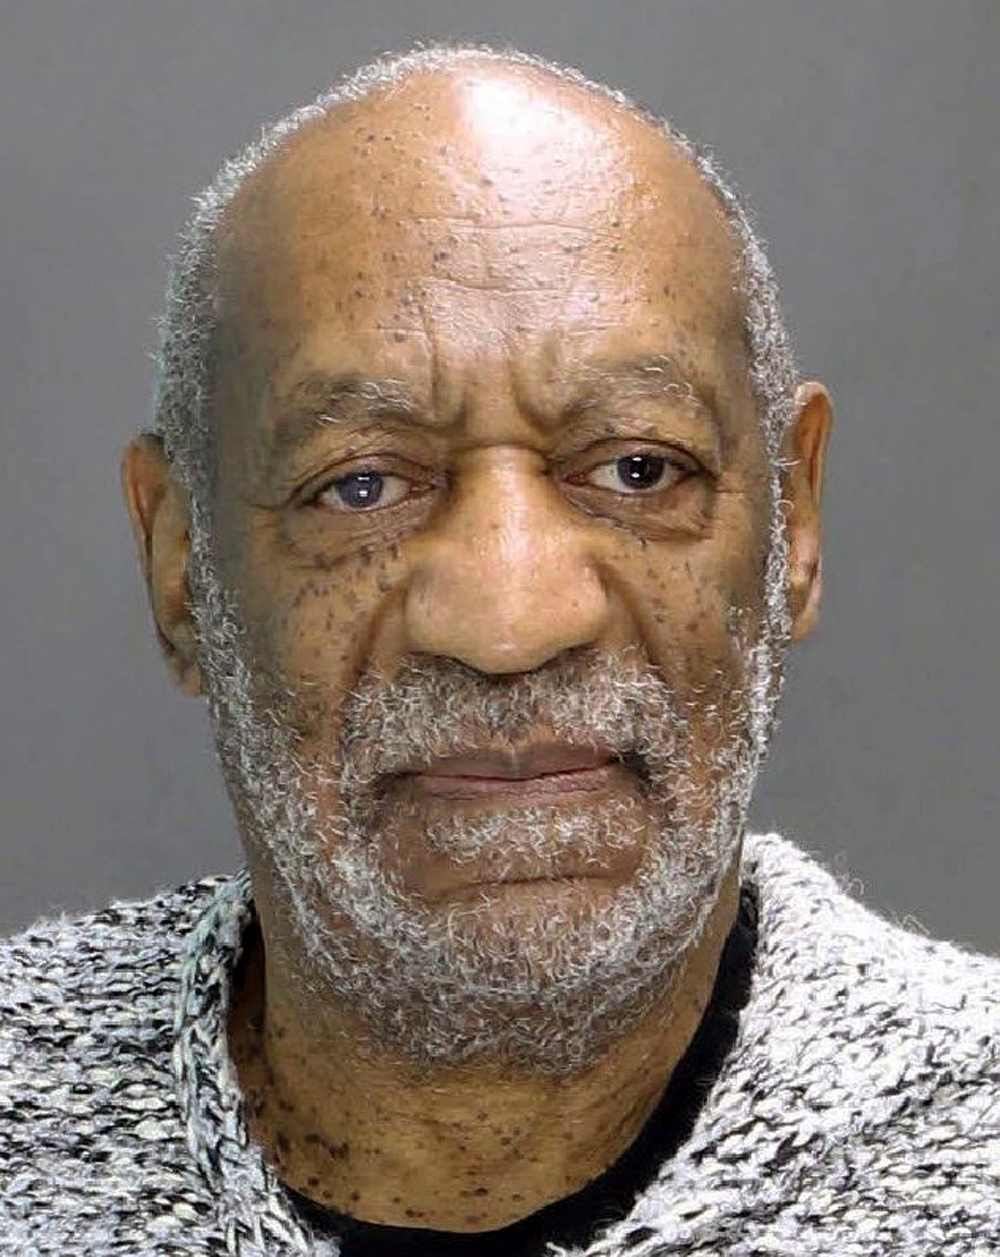 Bill Cosby Released After Sex Assault Conviction Overturned